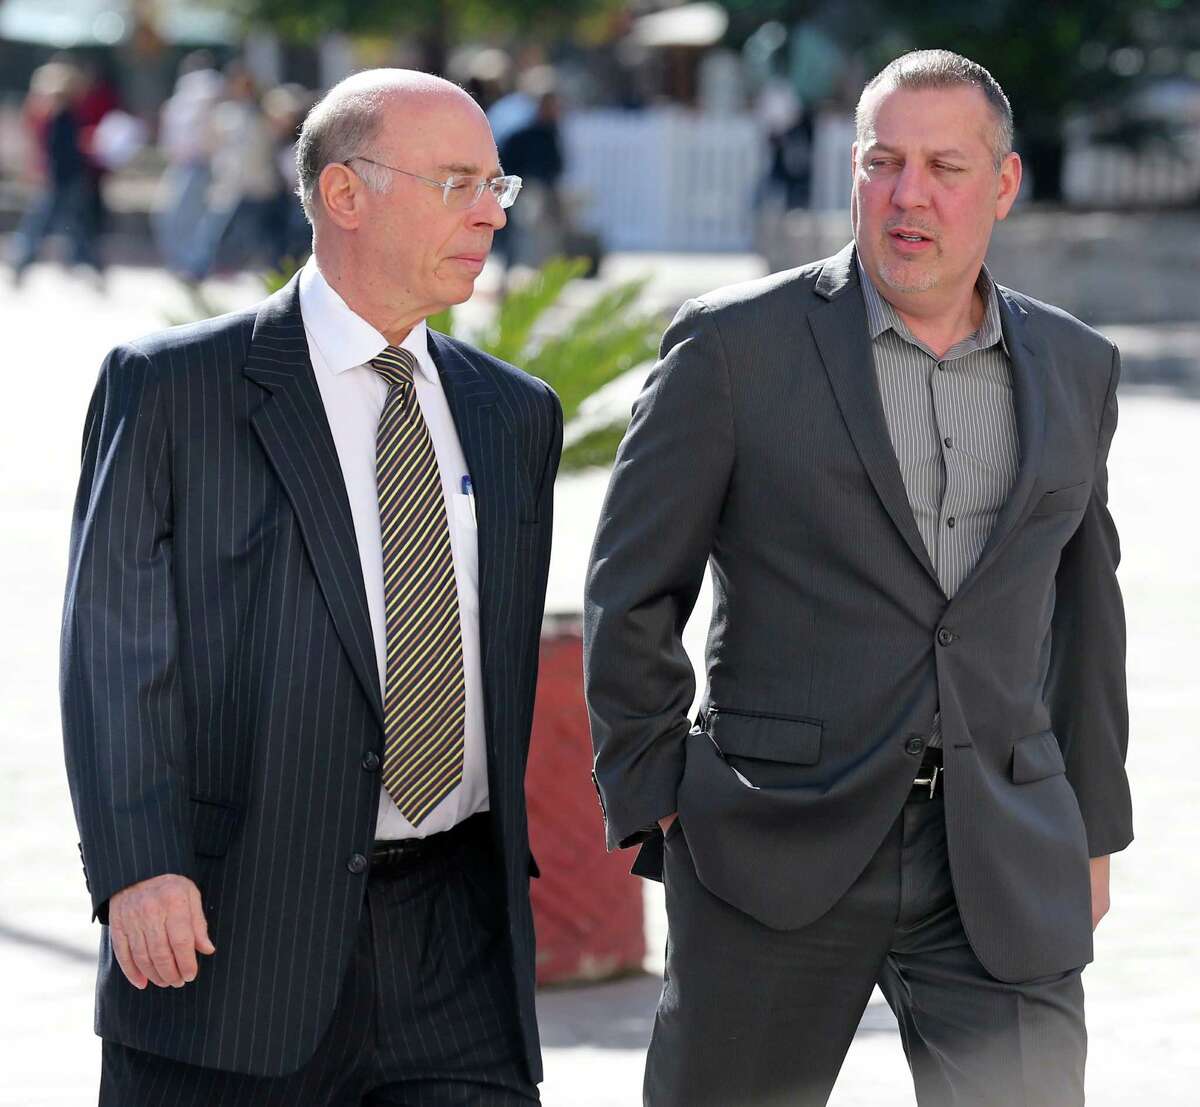 Attorney Martin Seidler (left) and Stan Bates walk into the Hipolito F. Garcia Federal Building to attend a bankruptcy court hearing. Bates, who was majority owner of San Antonio frac sand company FourWinds Logistics, has been accused of using investor money to support a “wild lifestyle,” according to a court document. Bates has disputed the allegation.